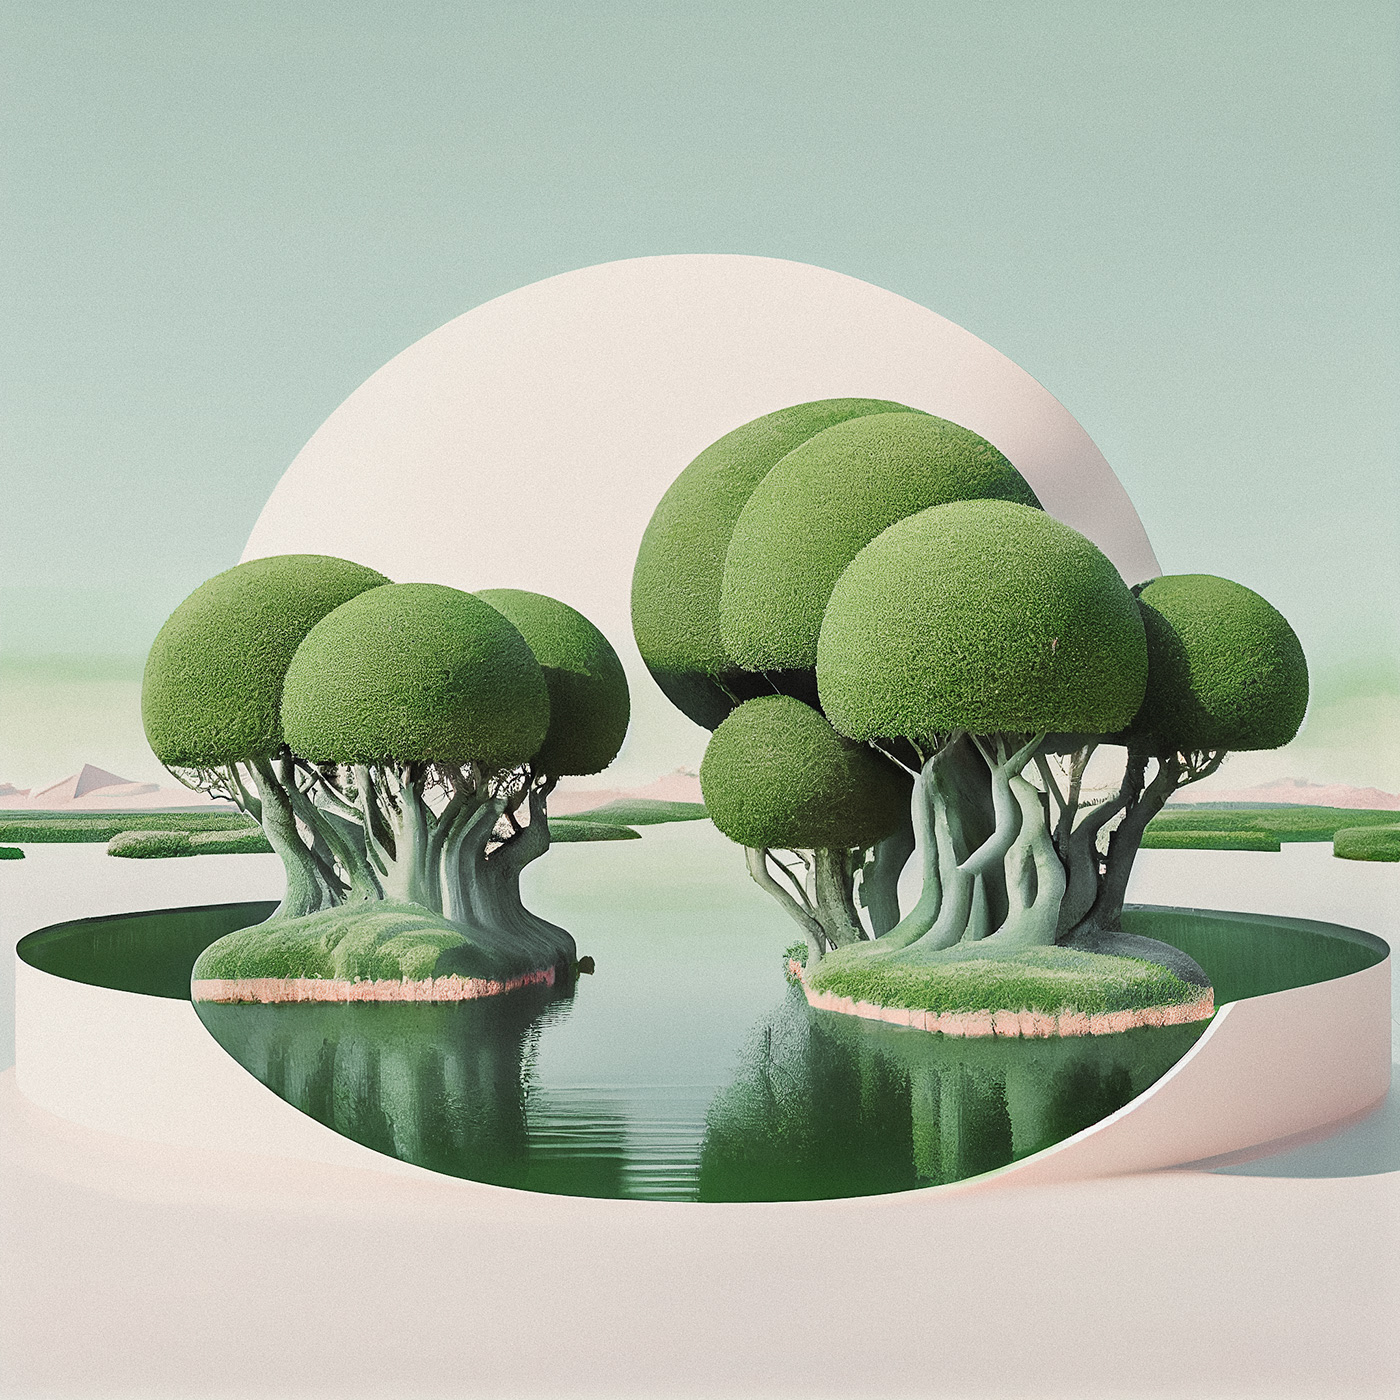 “Landscape of Dreams”: A Series of Surreal Natural Landscapes by Blackbird Studio